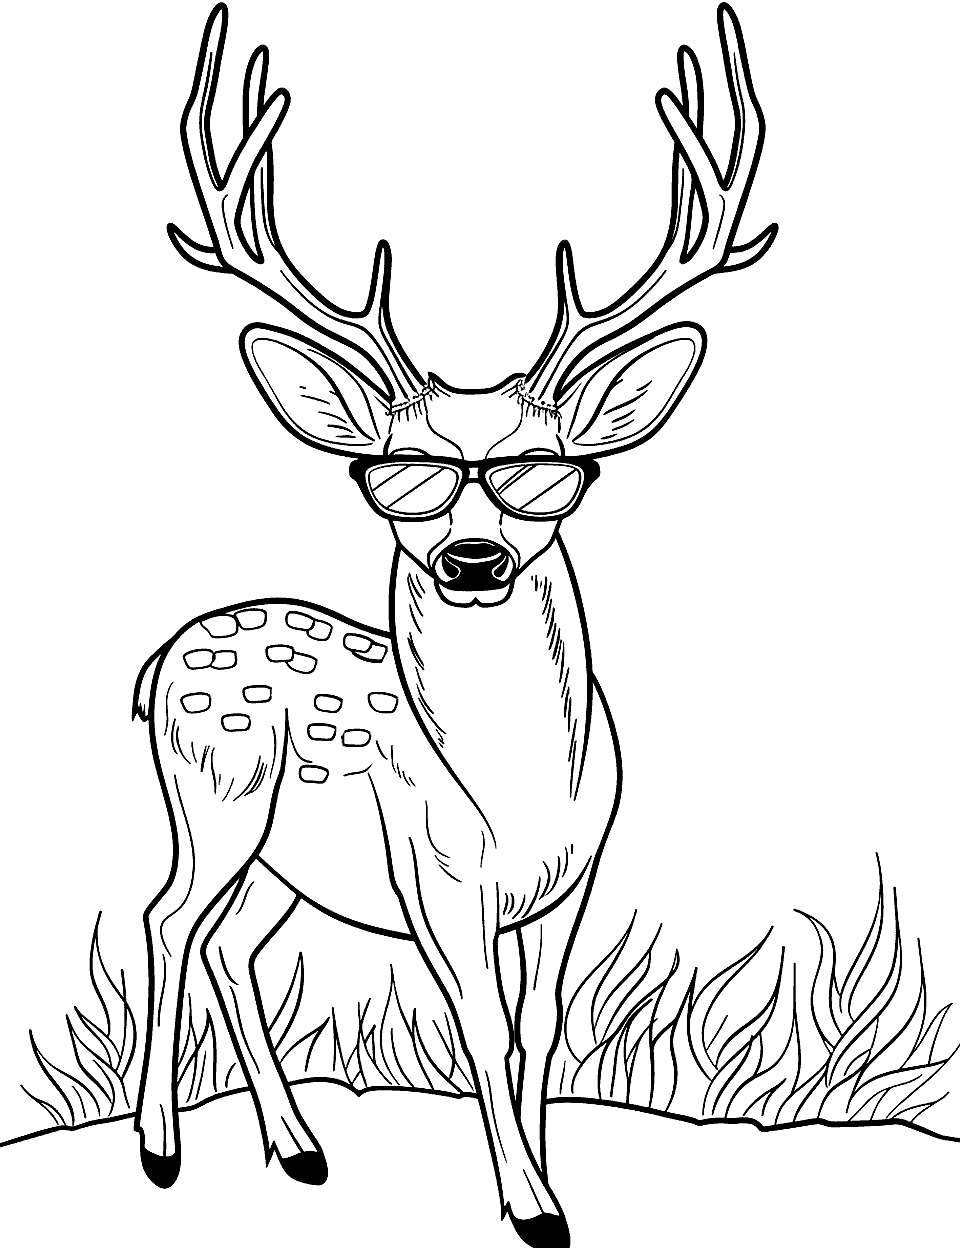 Cool Deer with Sunglasses Coloring Page - A deer looking cool wearing sunglasses.